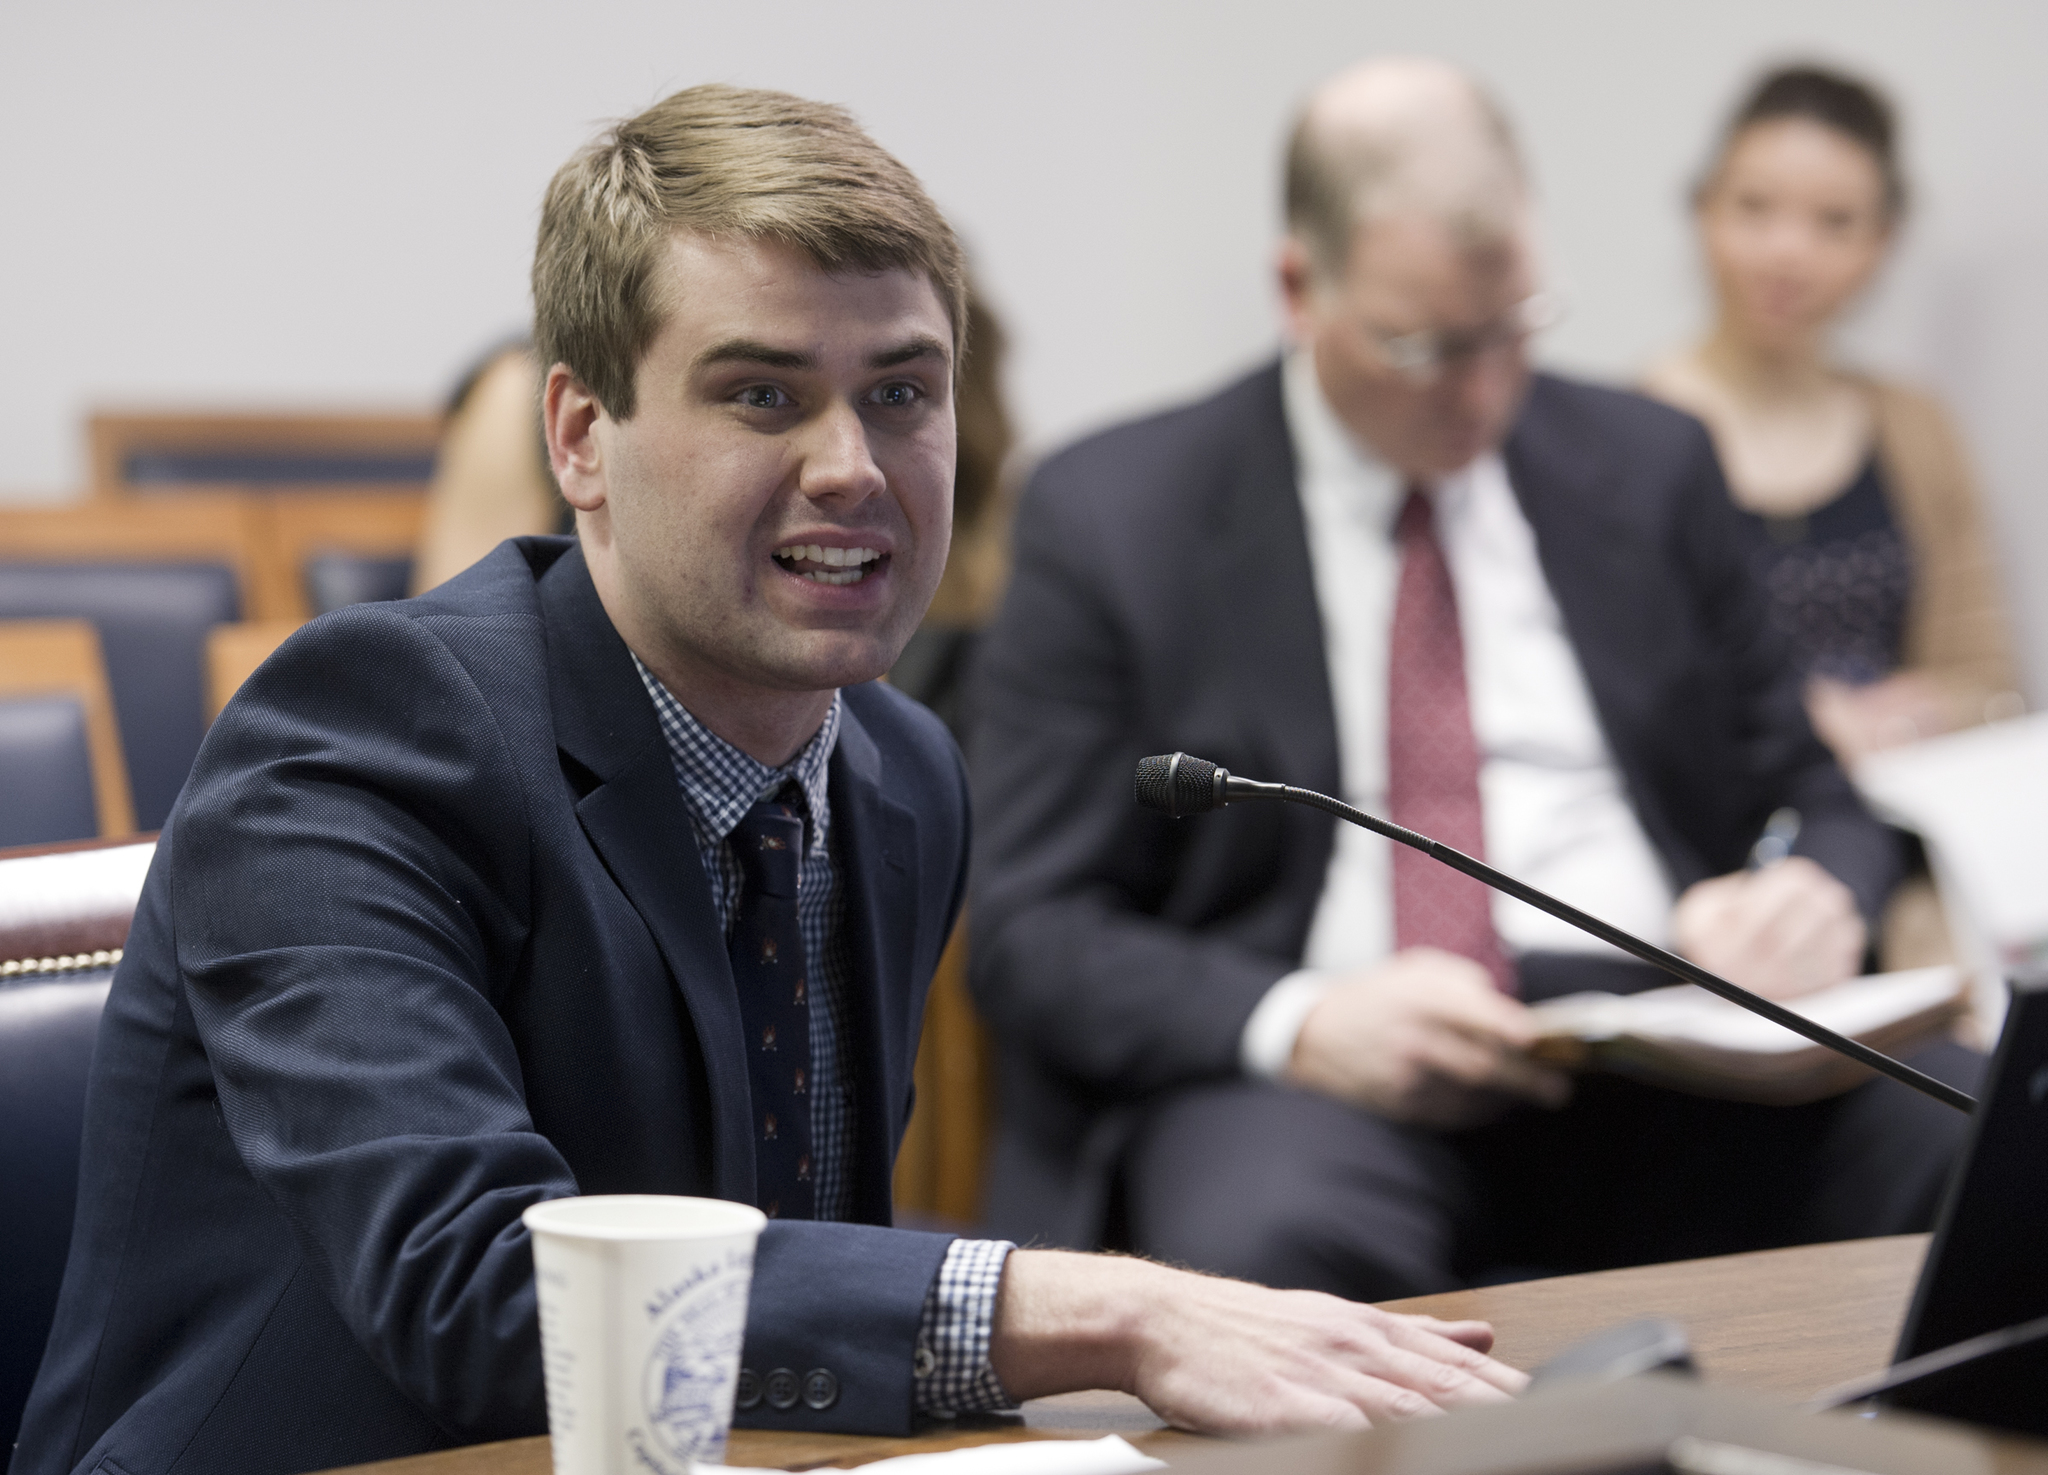 Brian Fechter, policy analyst for the Office of Management and Budget, speaks to House Transportation Committee members Tuesday about HB 60, the motor fuel tax bill. (Michael Penn | Juneau Empire)